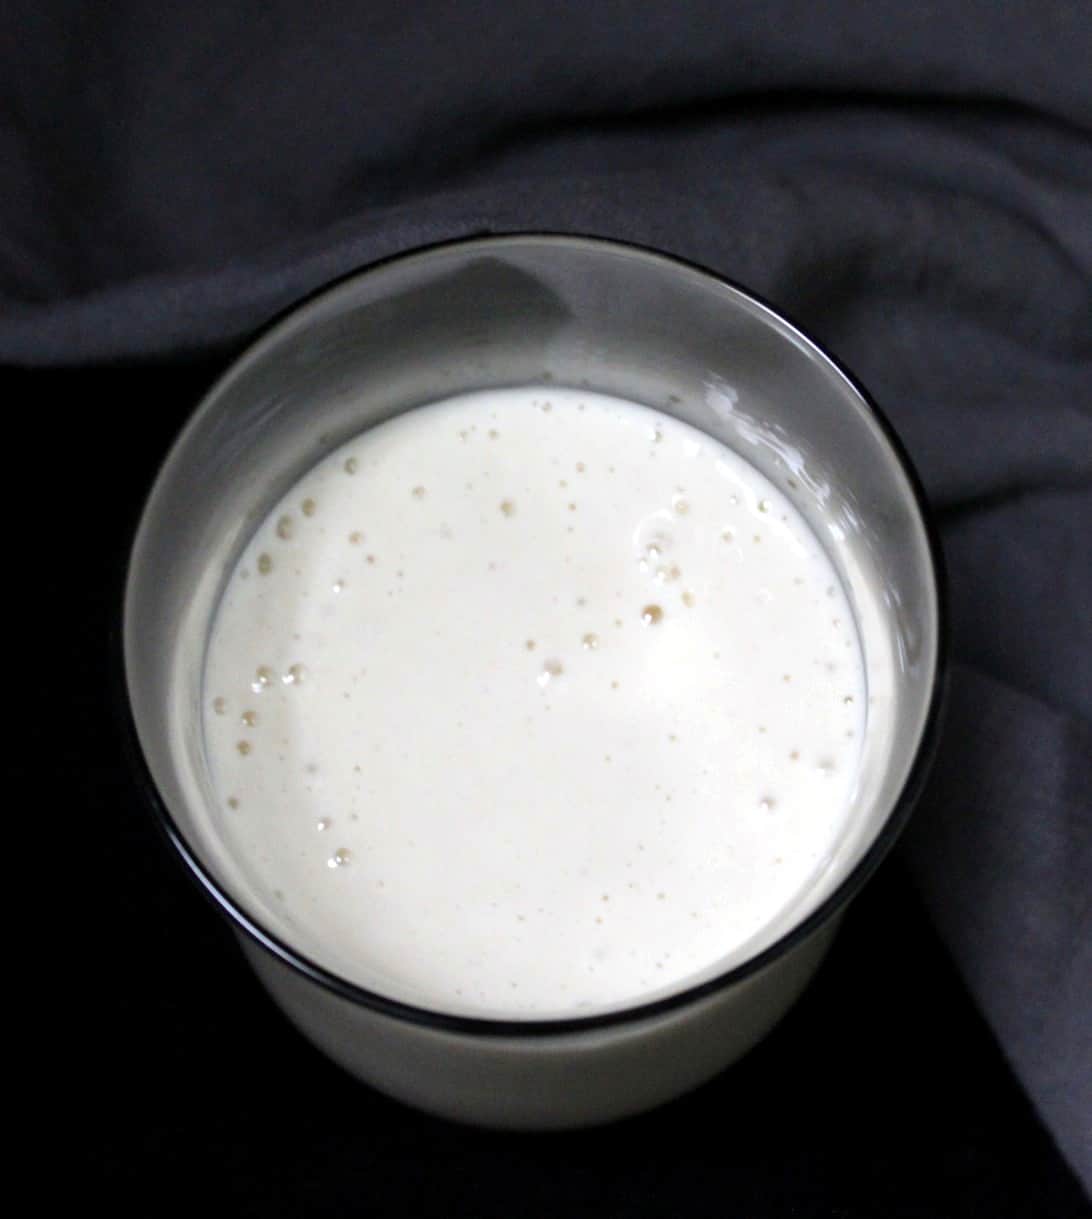 Mature Sourdough Starter with bubbles in a glass jar on a black background